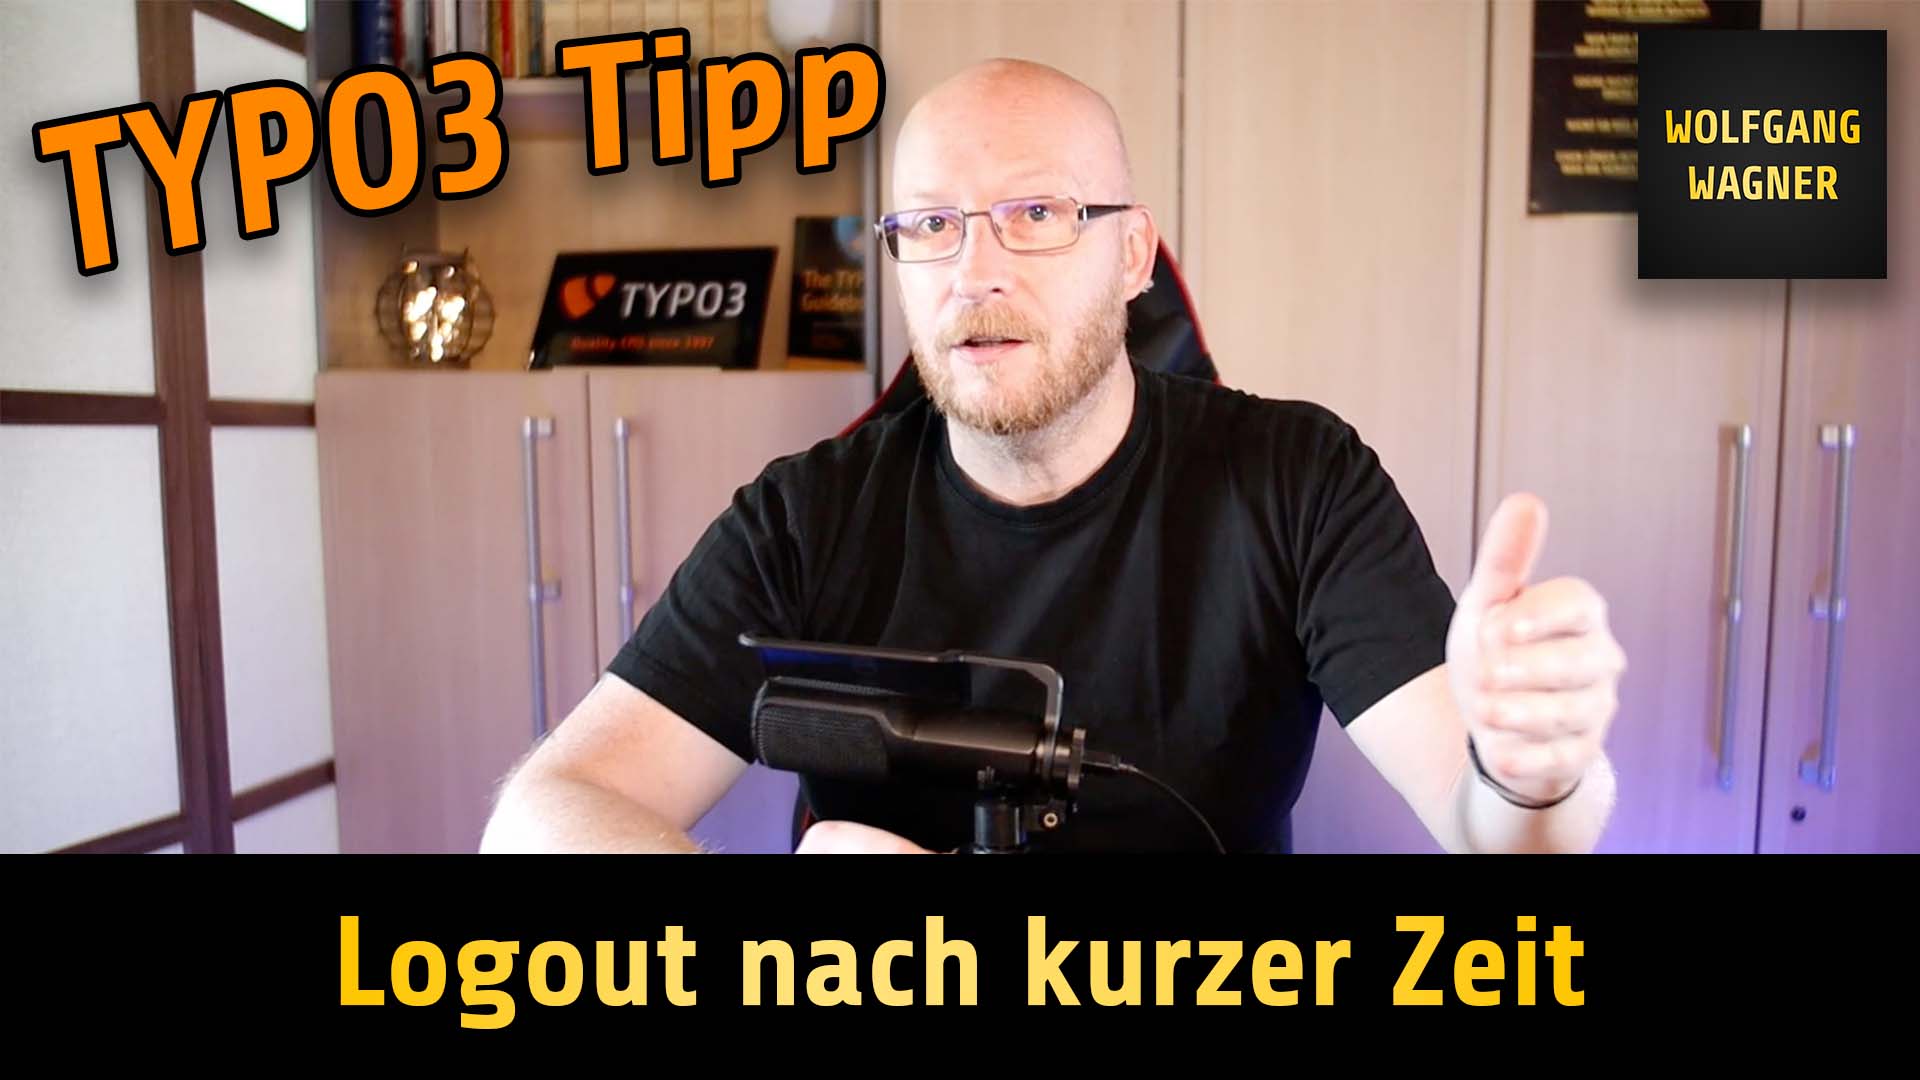 You are currently viewing TYPO3: Logout nach kurzer Zeit